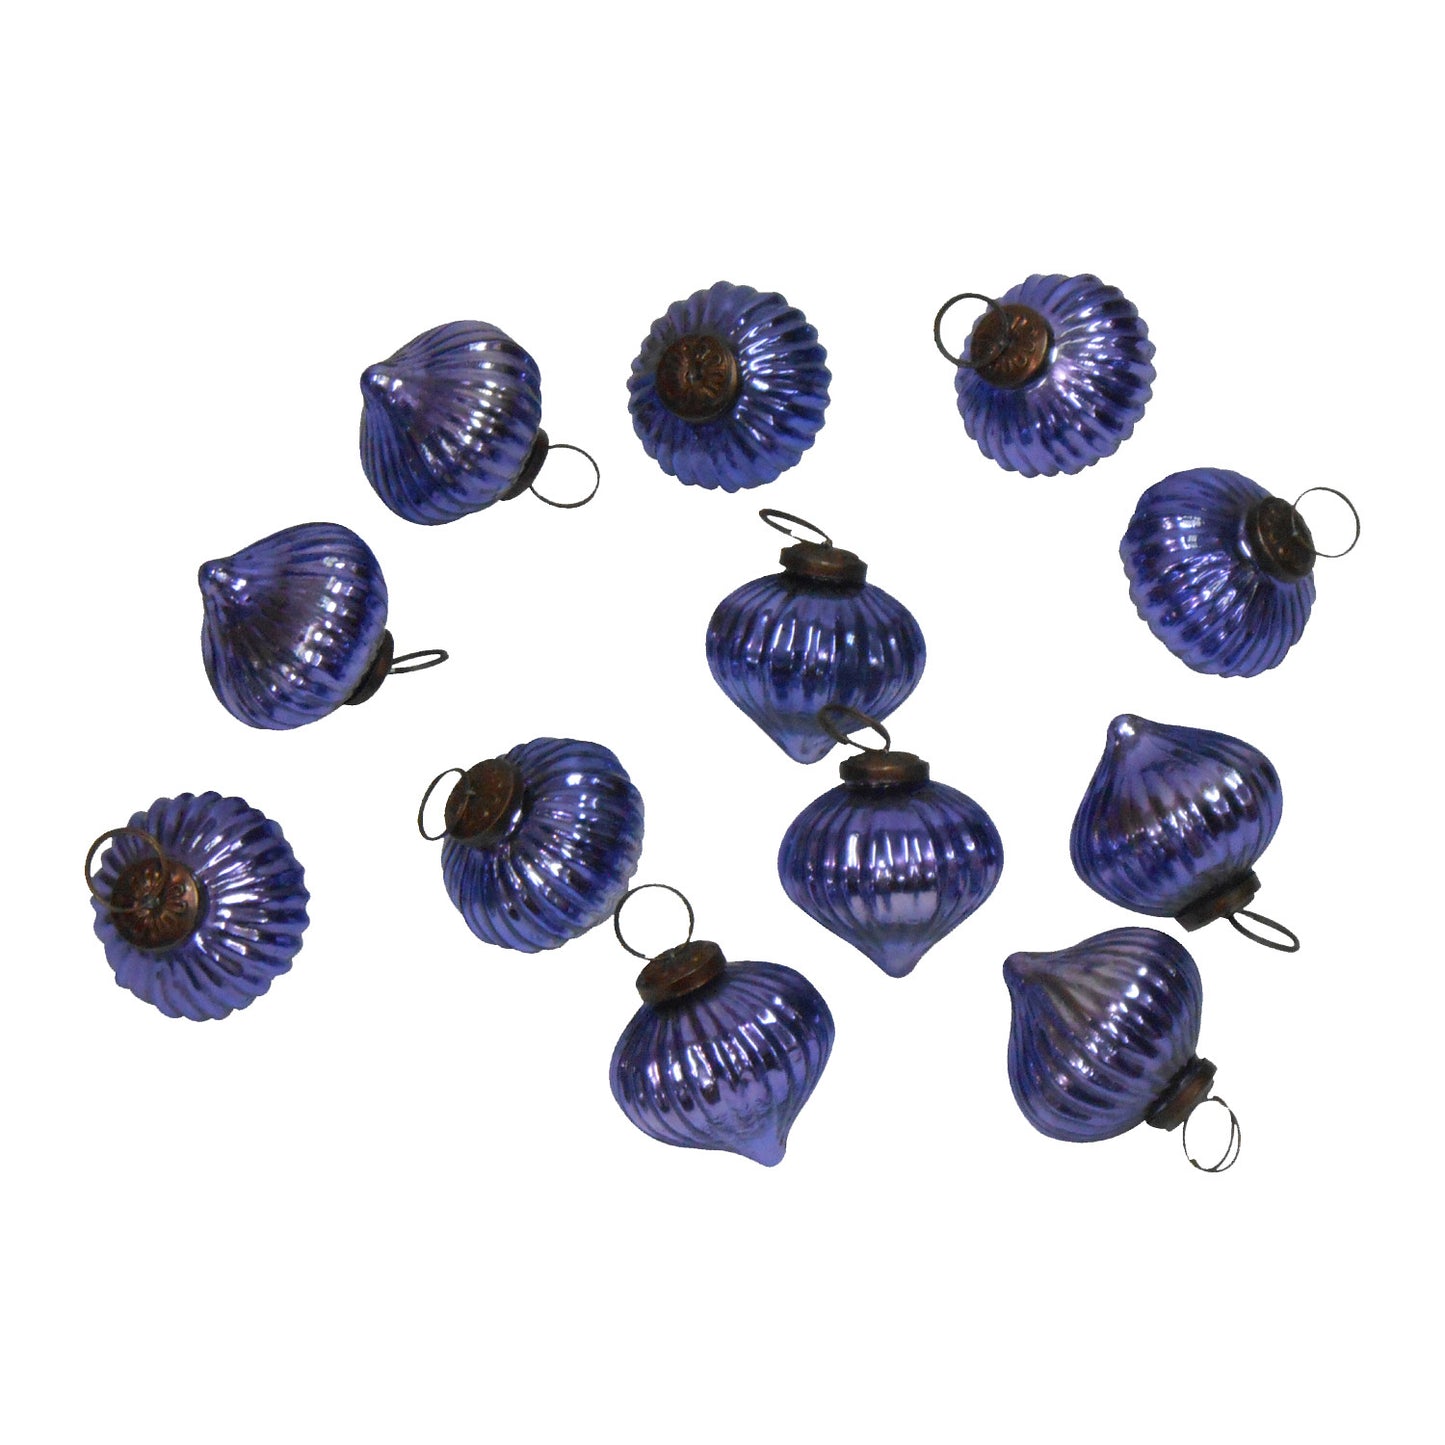 GiftBay ORN-107(S/12) Antique-look Glass Ornament 2.5" H, Set of 12 for Christmas Tree Decorations